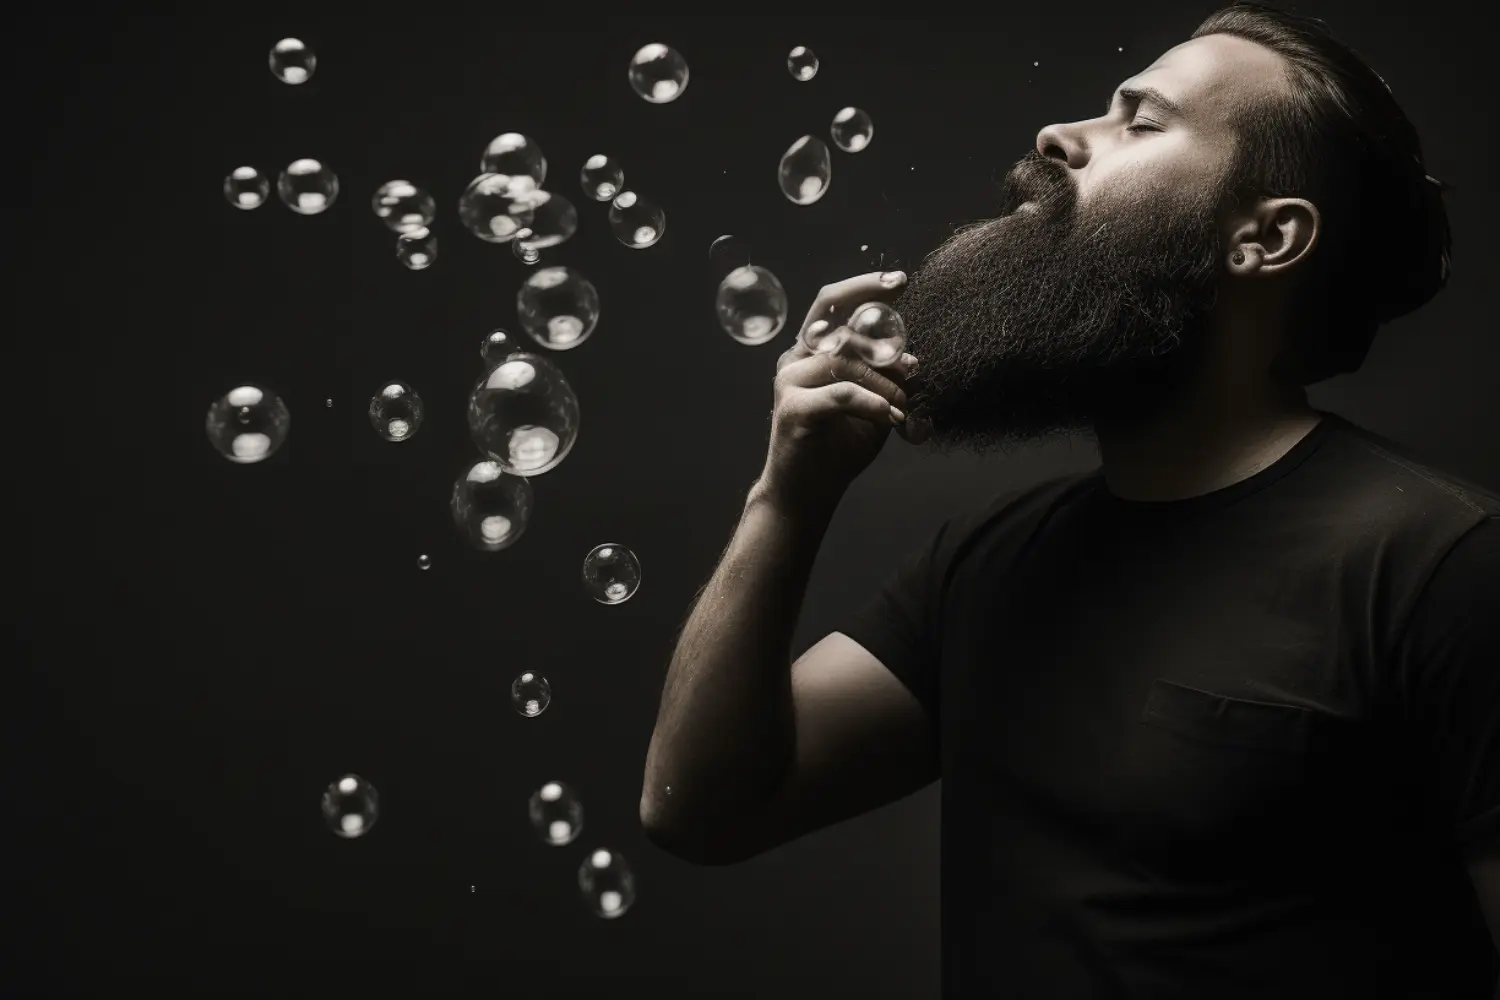 man stroking beard with bubbles